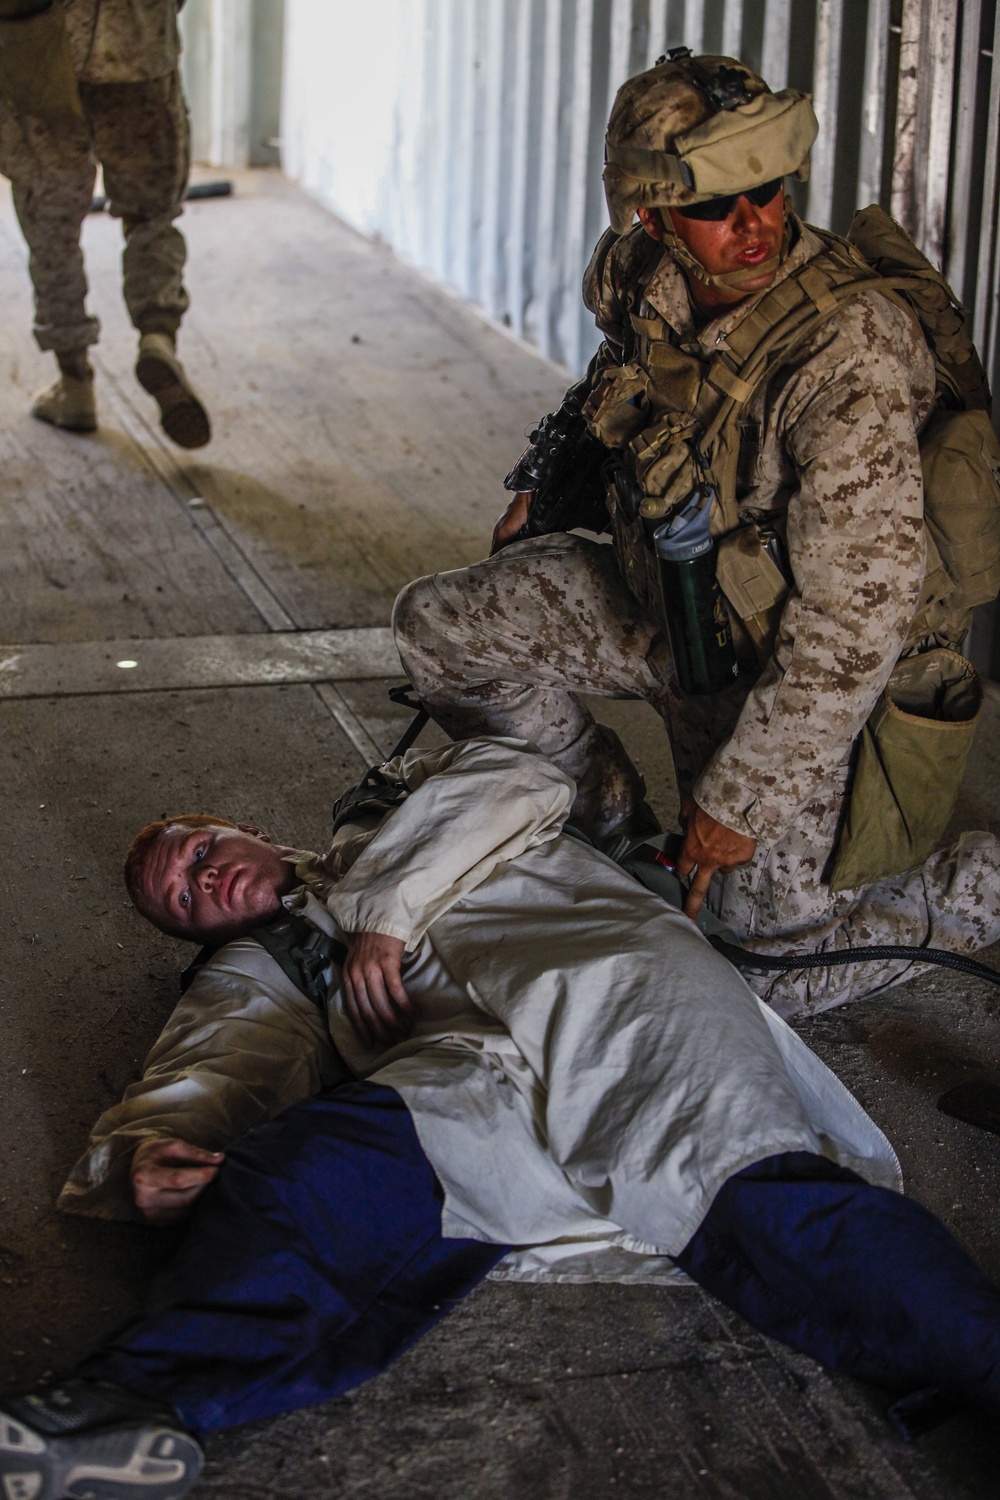 Live Action Role-Playing Done Right – the Marine Corps Way